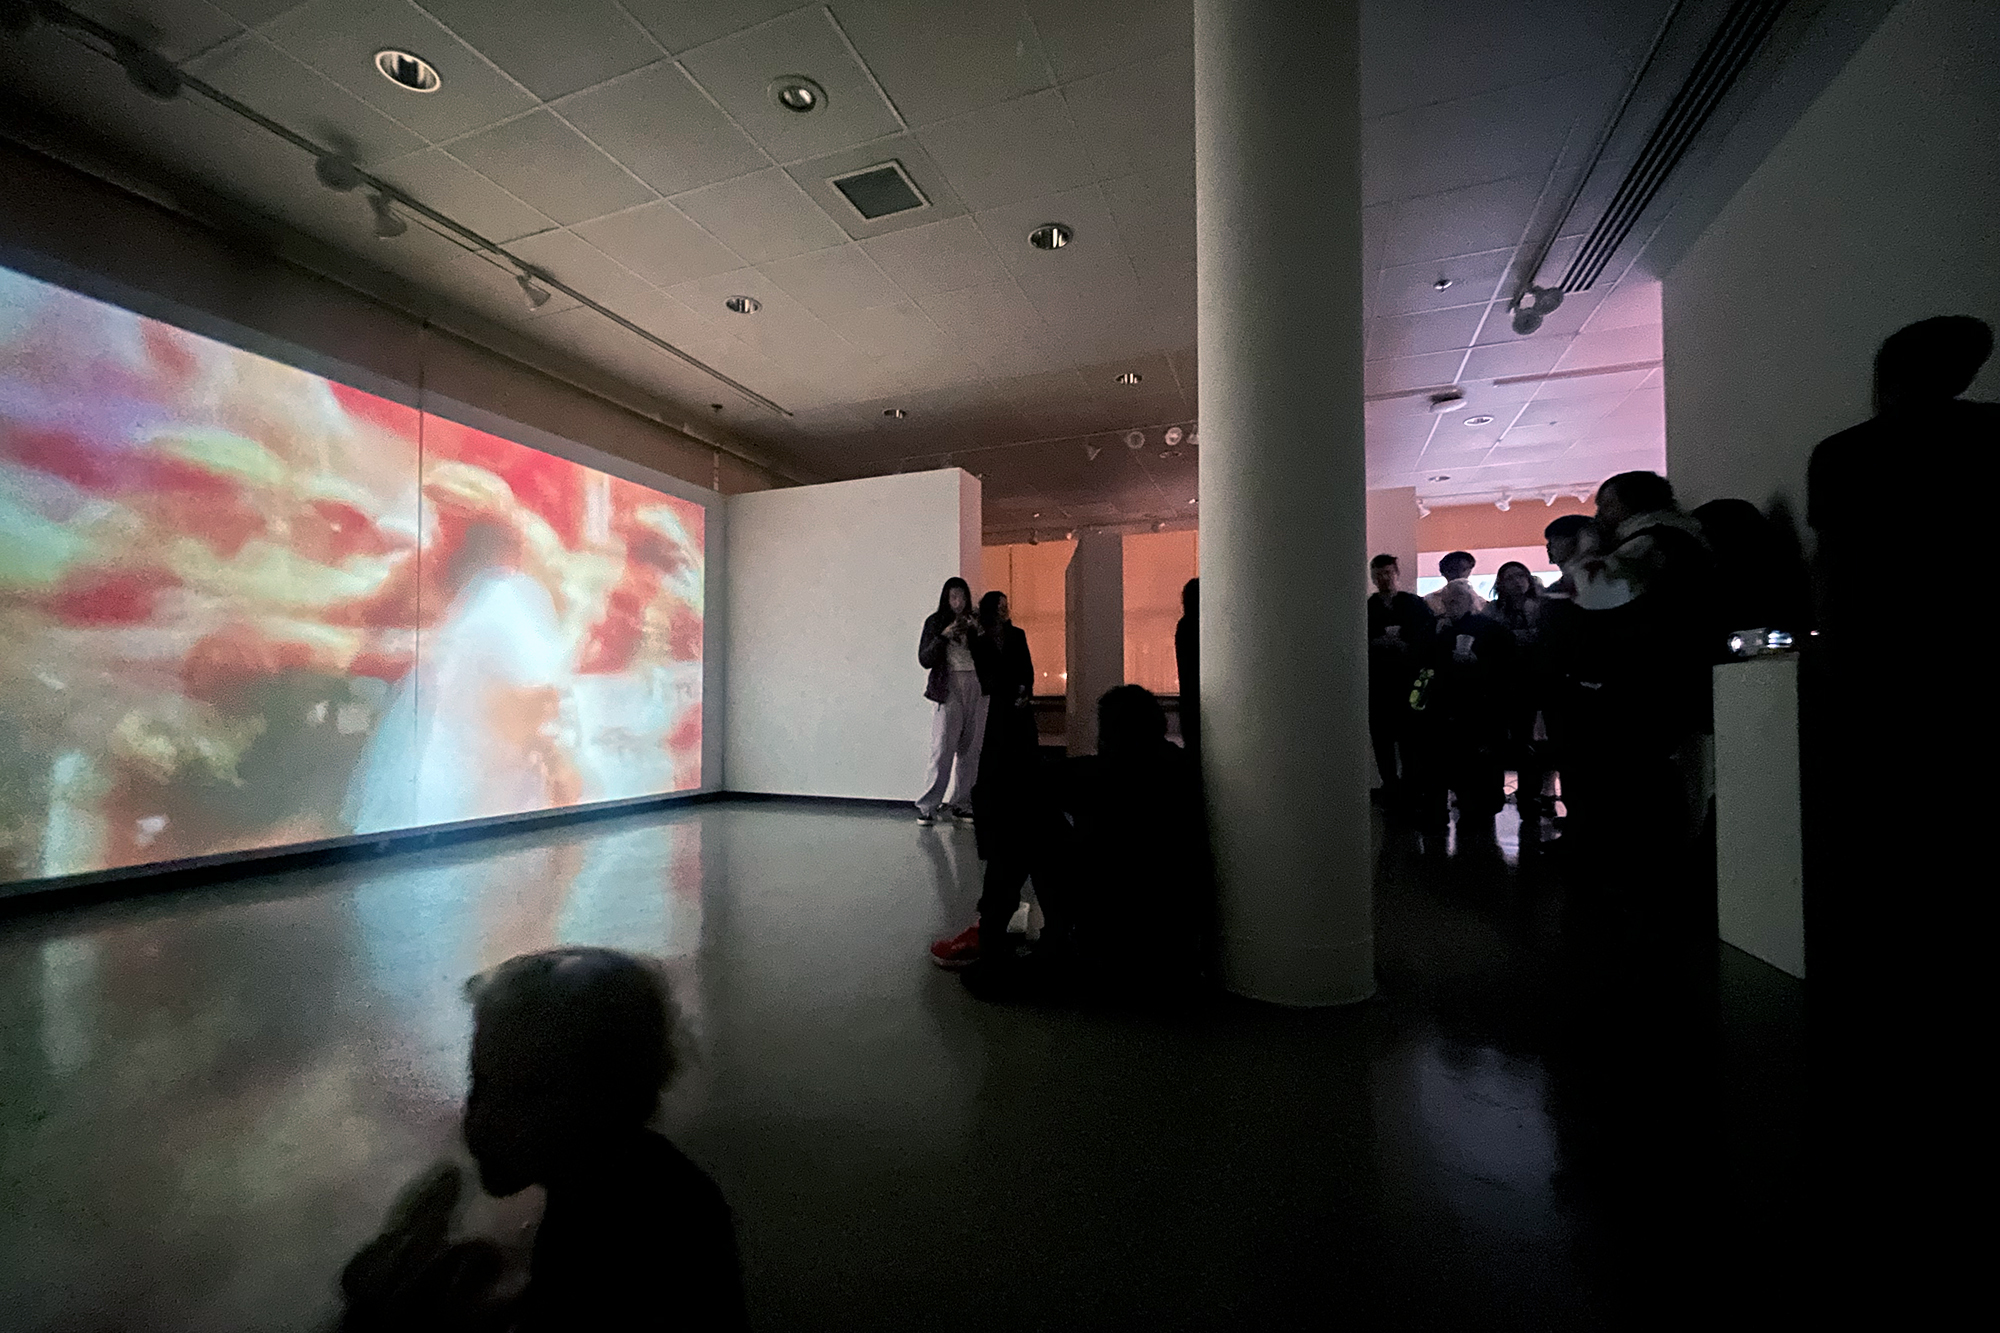 People watching a film installation in a gallery.